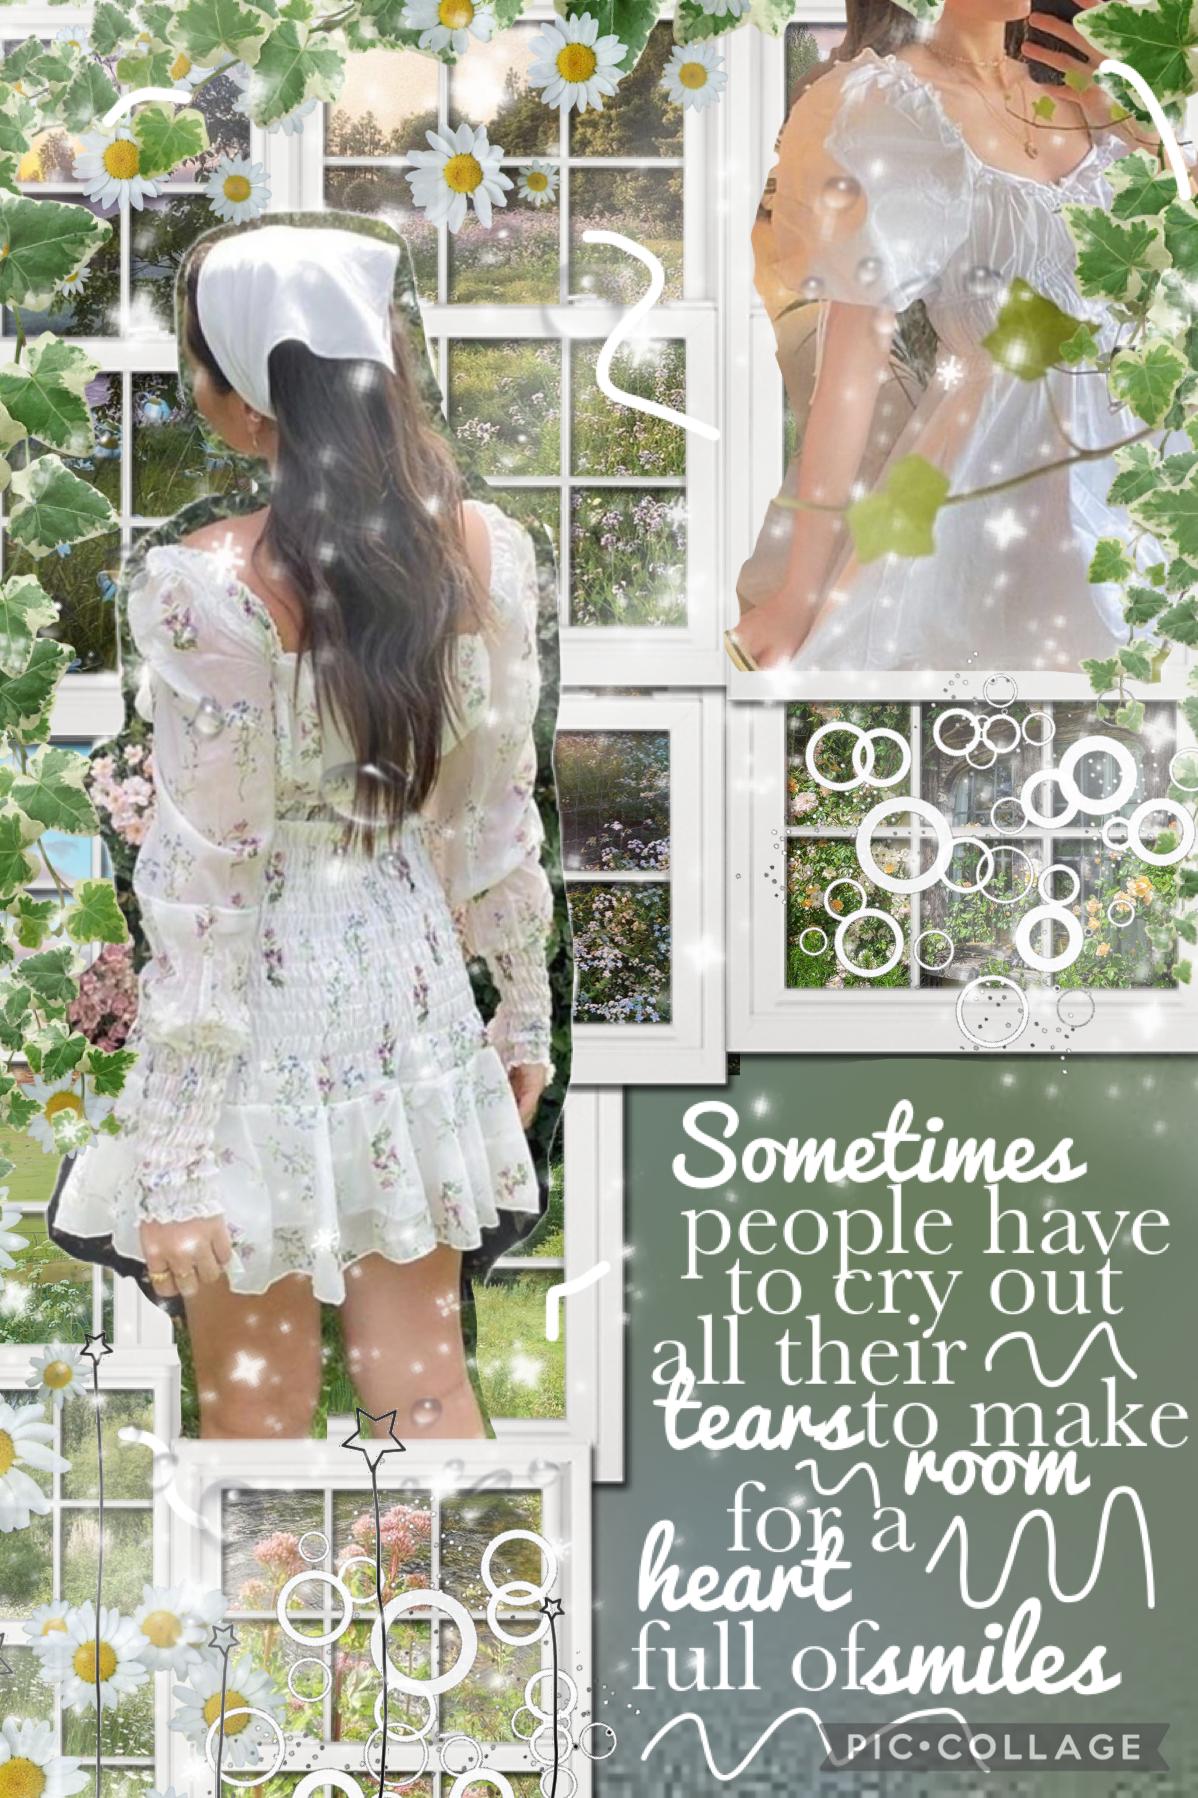 •10•09•23• (tap)
First collage of the new theme, I’m kinda in love with this XD tell me what you think<3 anyways, school starts again in two days and I have classes with my crush 🥳 I’m so nervous ahhh Qotd: fav subject? Aotd: Latin and history (unusual Ik